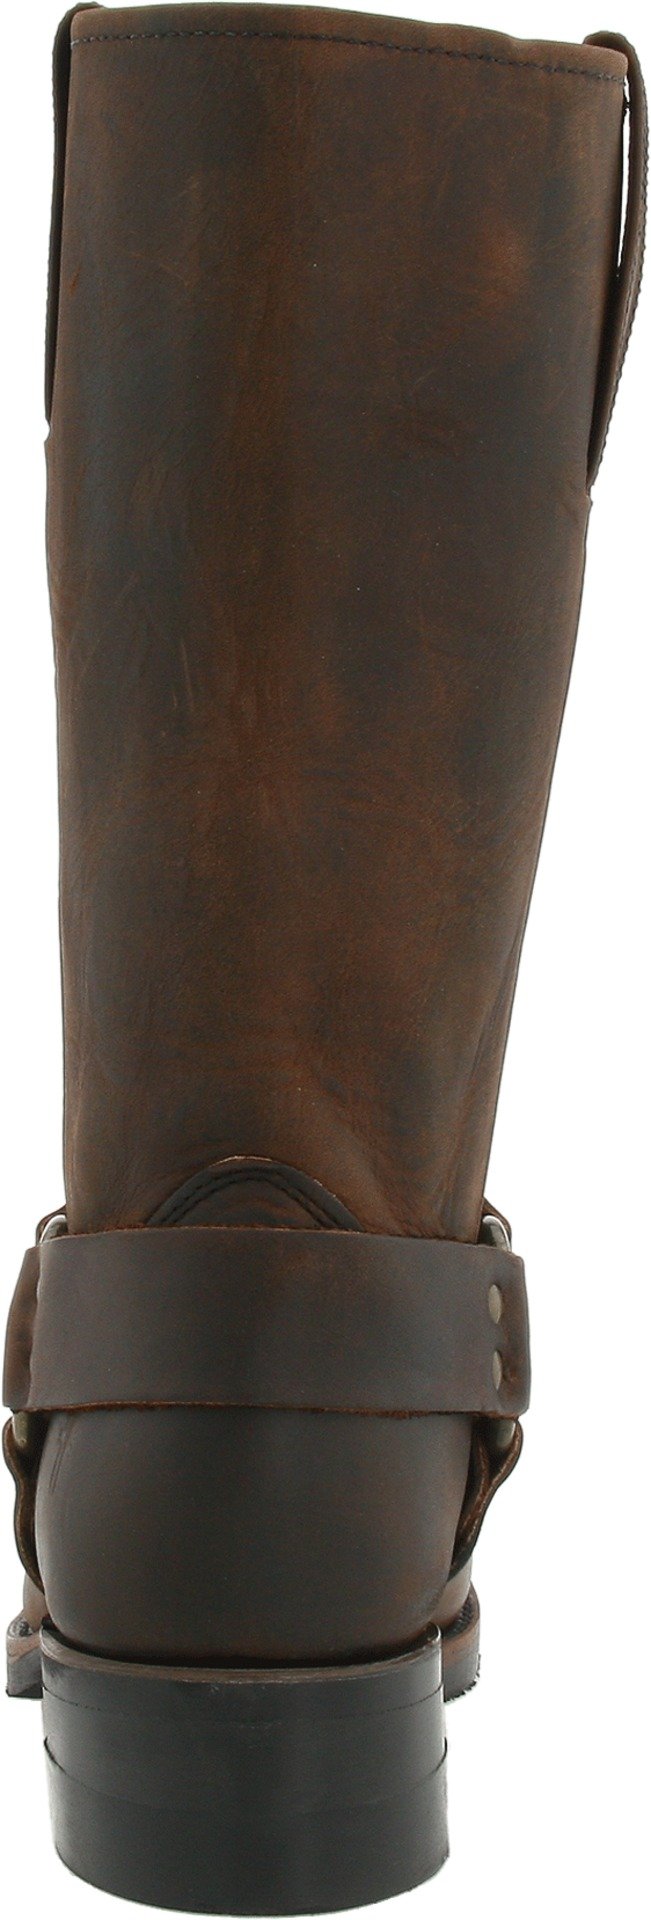 Frye Harness 12R Boots for Men with Oiled-Leather Upper, Goodyear Welt Construction, Stacked Leather Heel, and Nickel & Brass Hardware – 12” Shaft Height